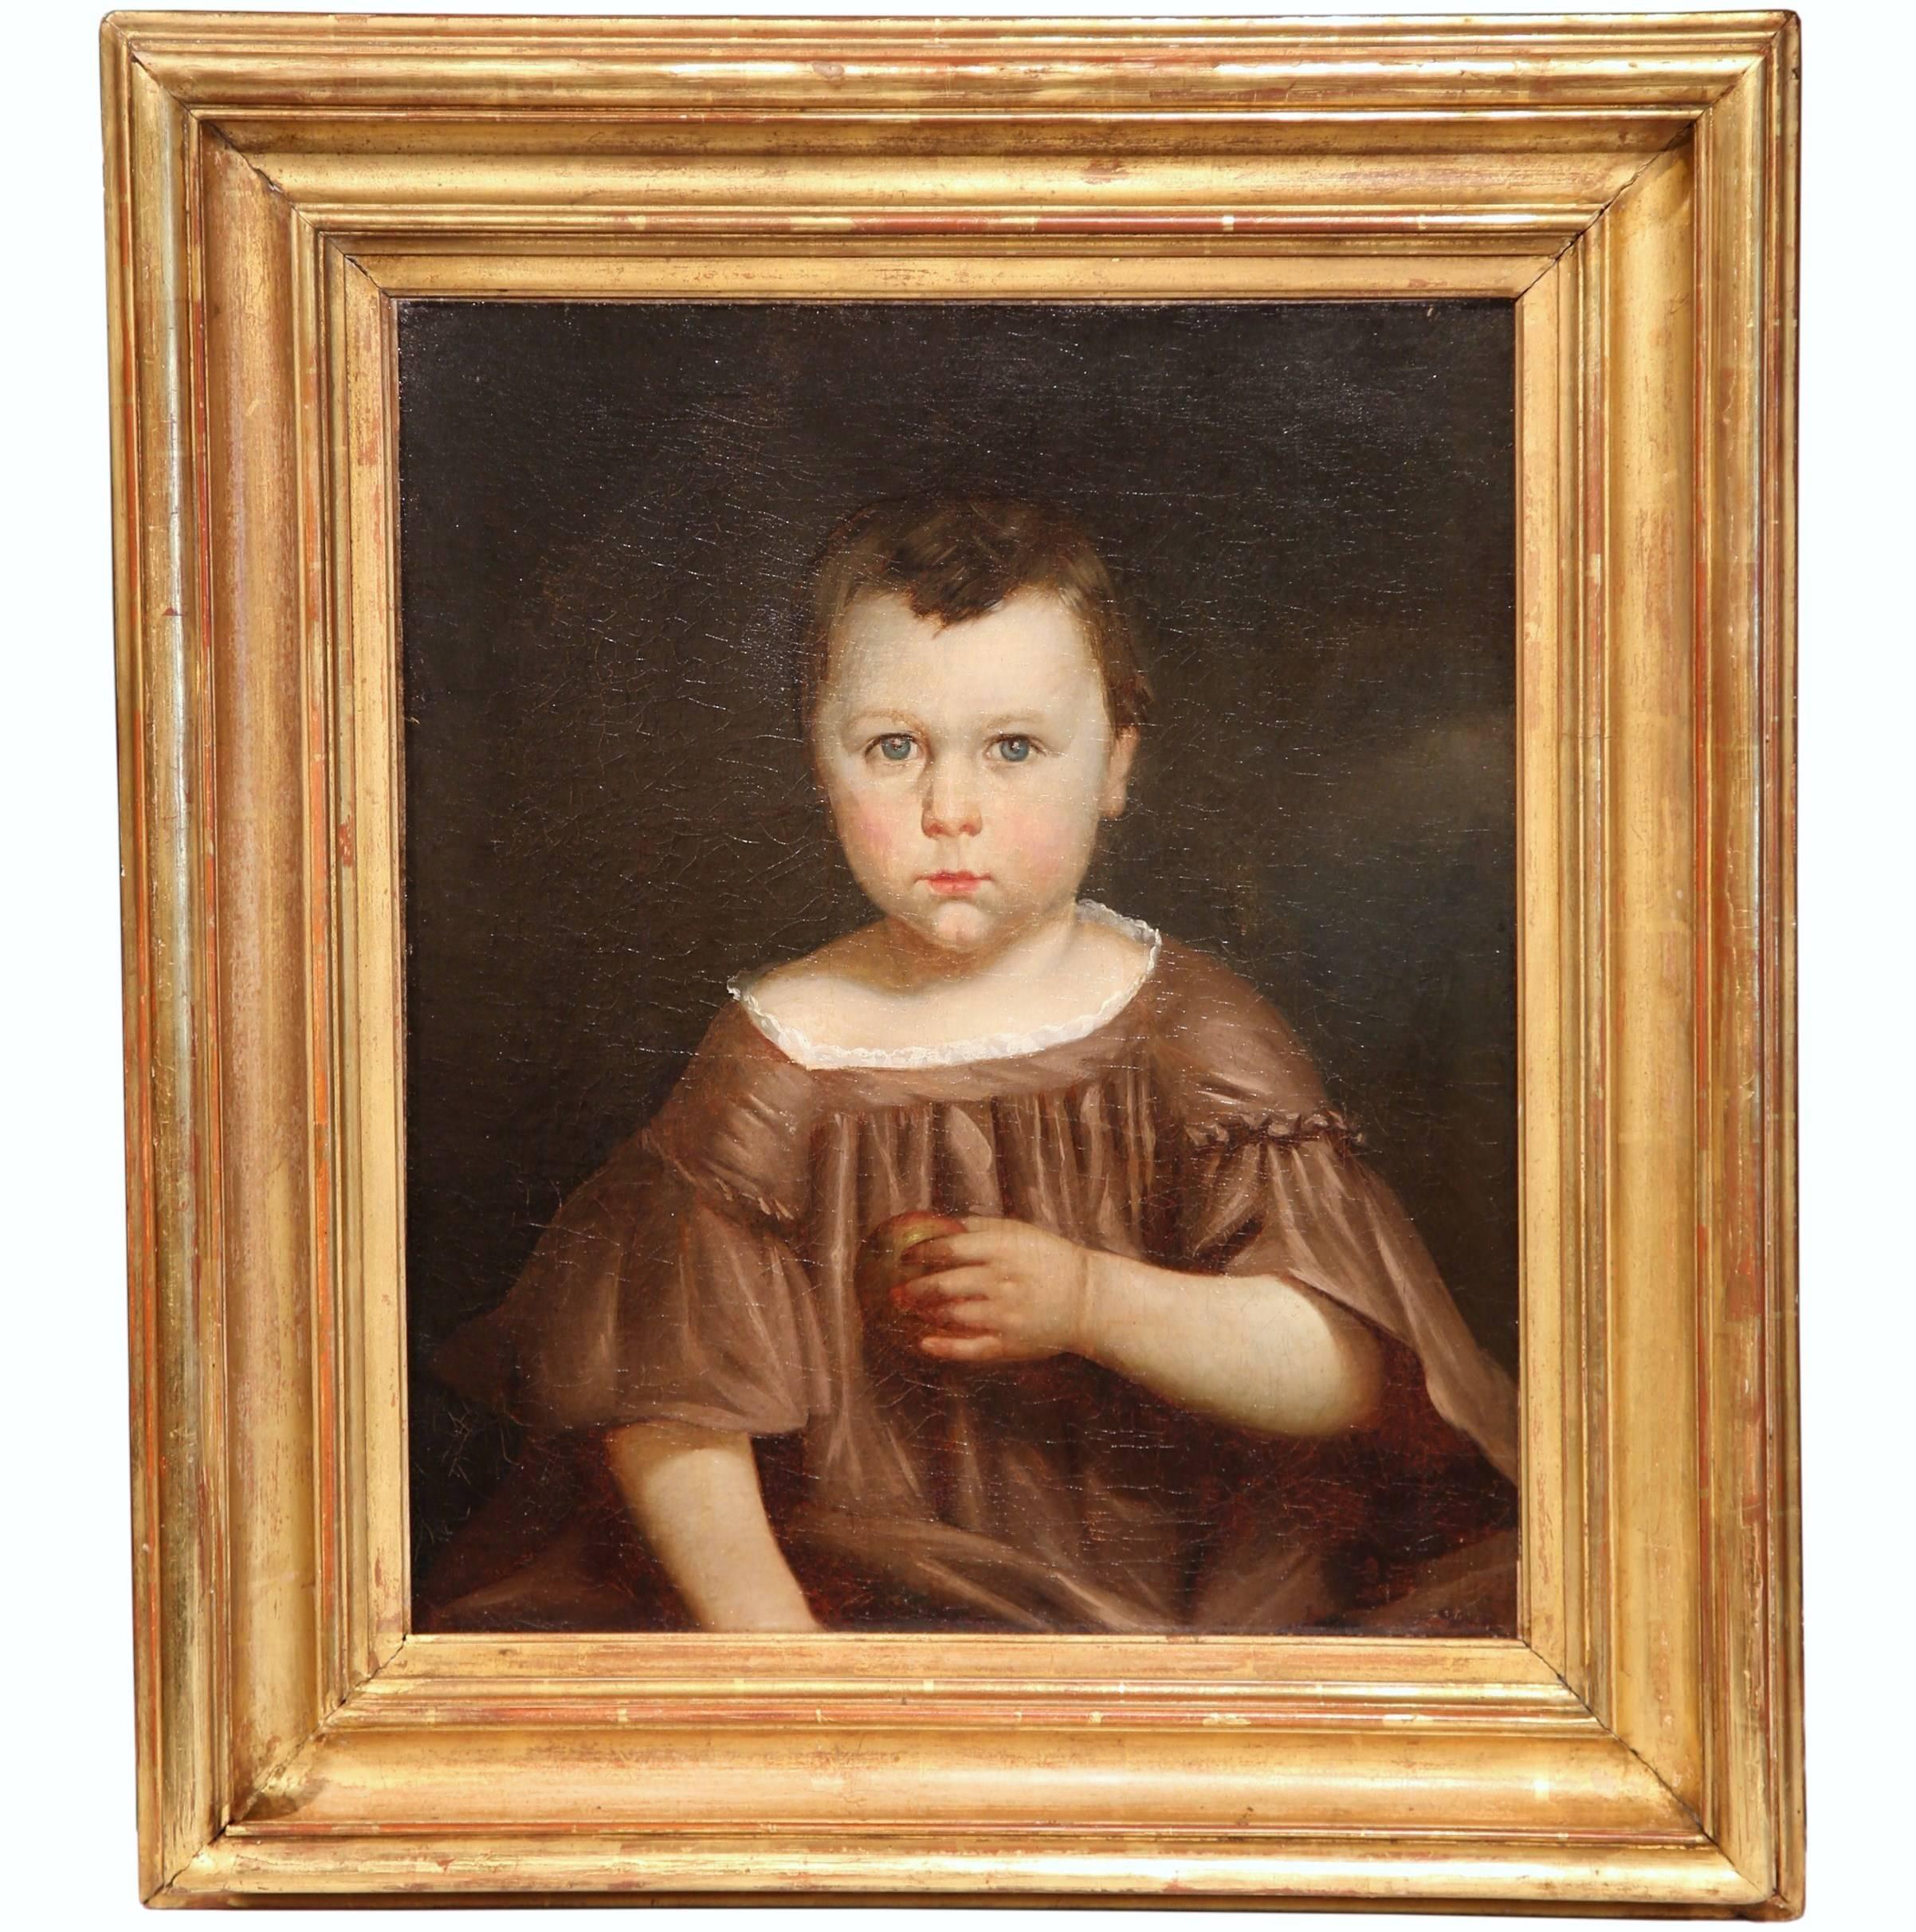 This highly detailed oil on canvas was painted in France circa 1820. The high quality portrait features a young boy in traditional clothing holding an apple in his left hand. The figure has a strong, piercing gaze and a beautiful facial expression.